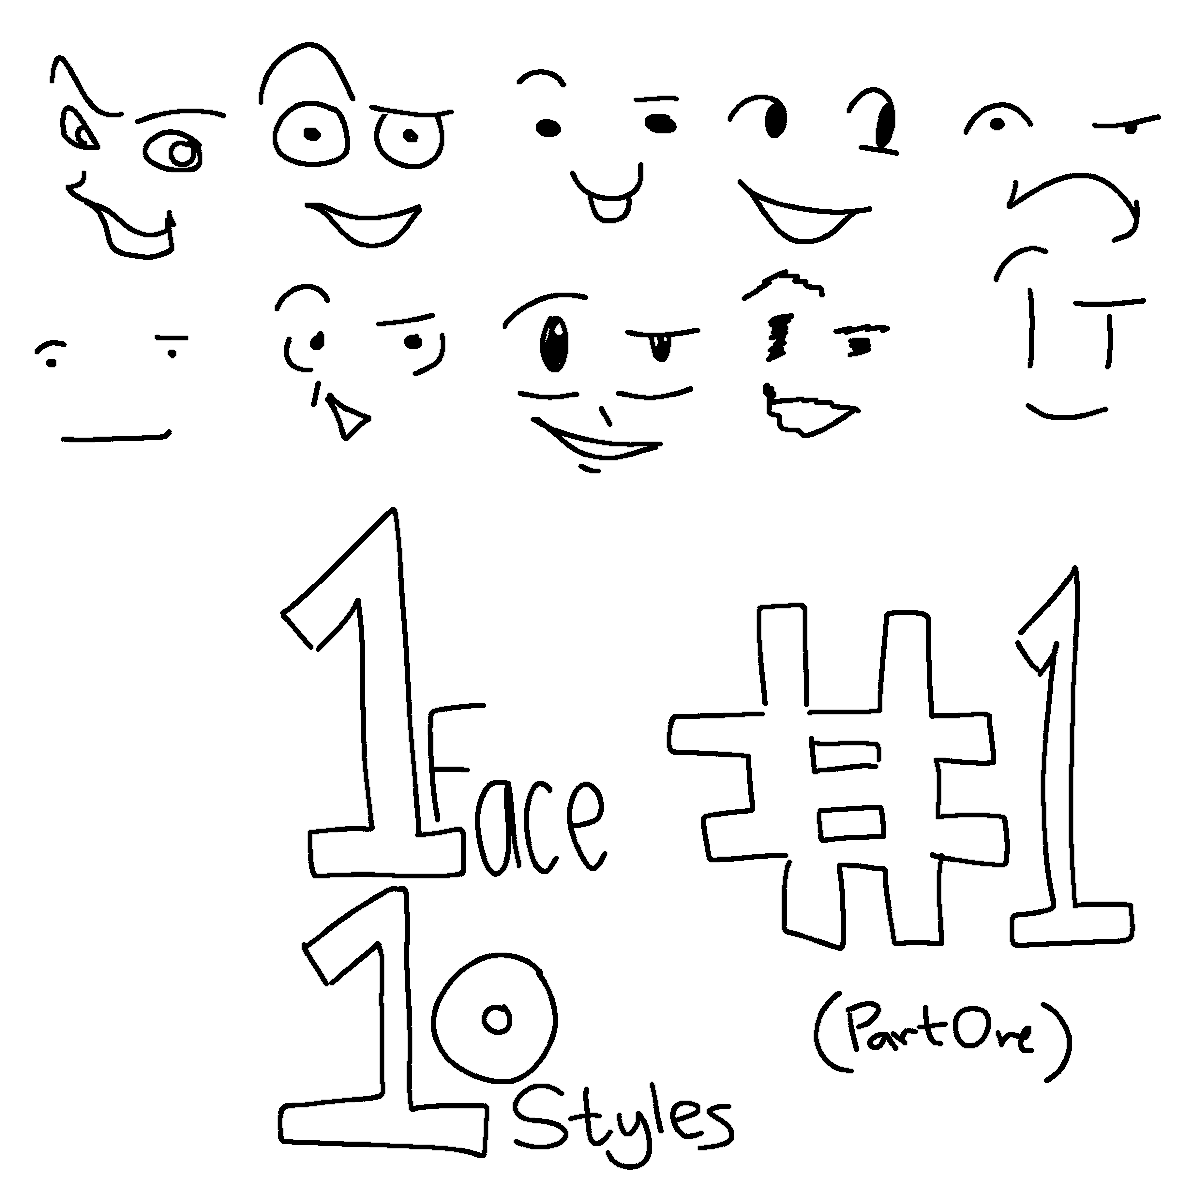 1Face 10 Styles #1